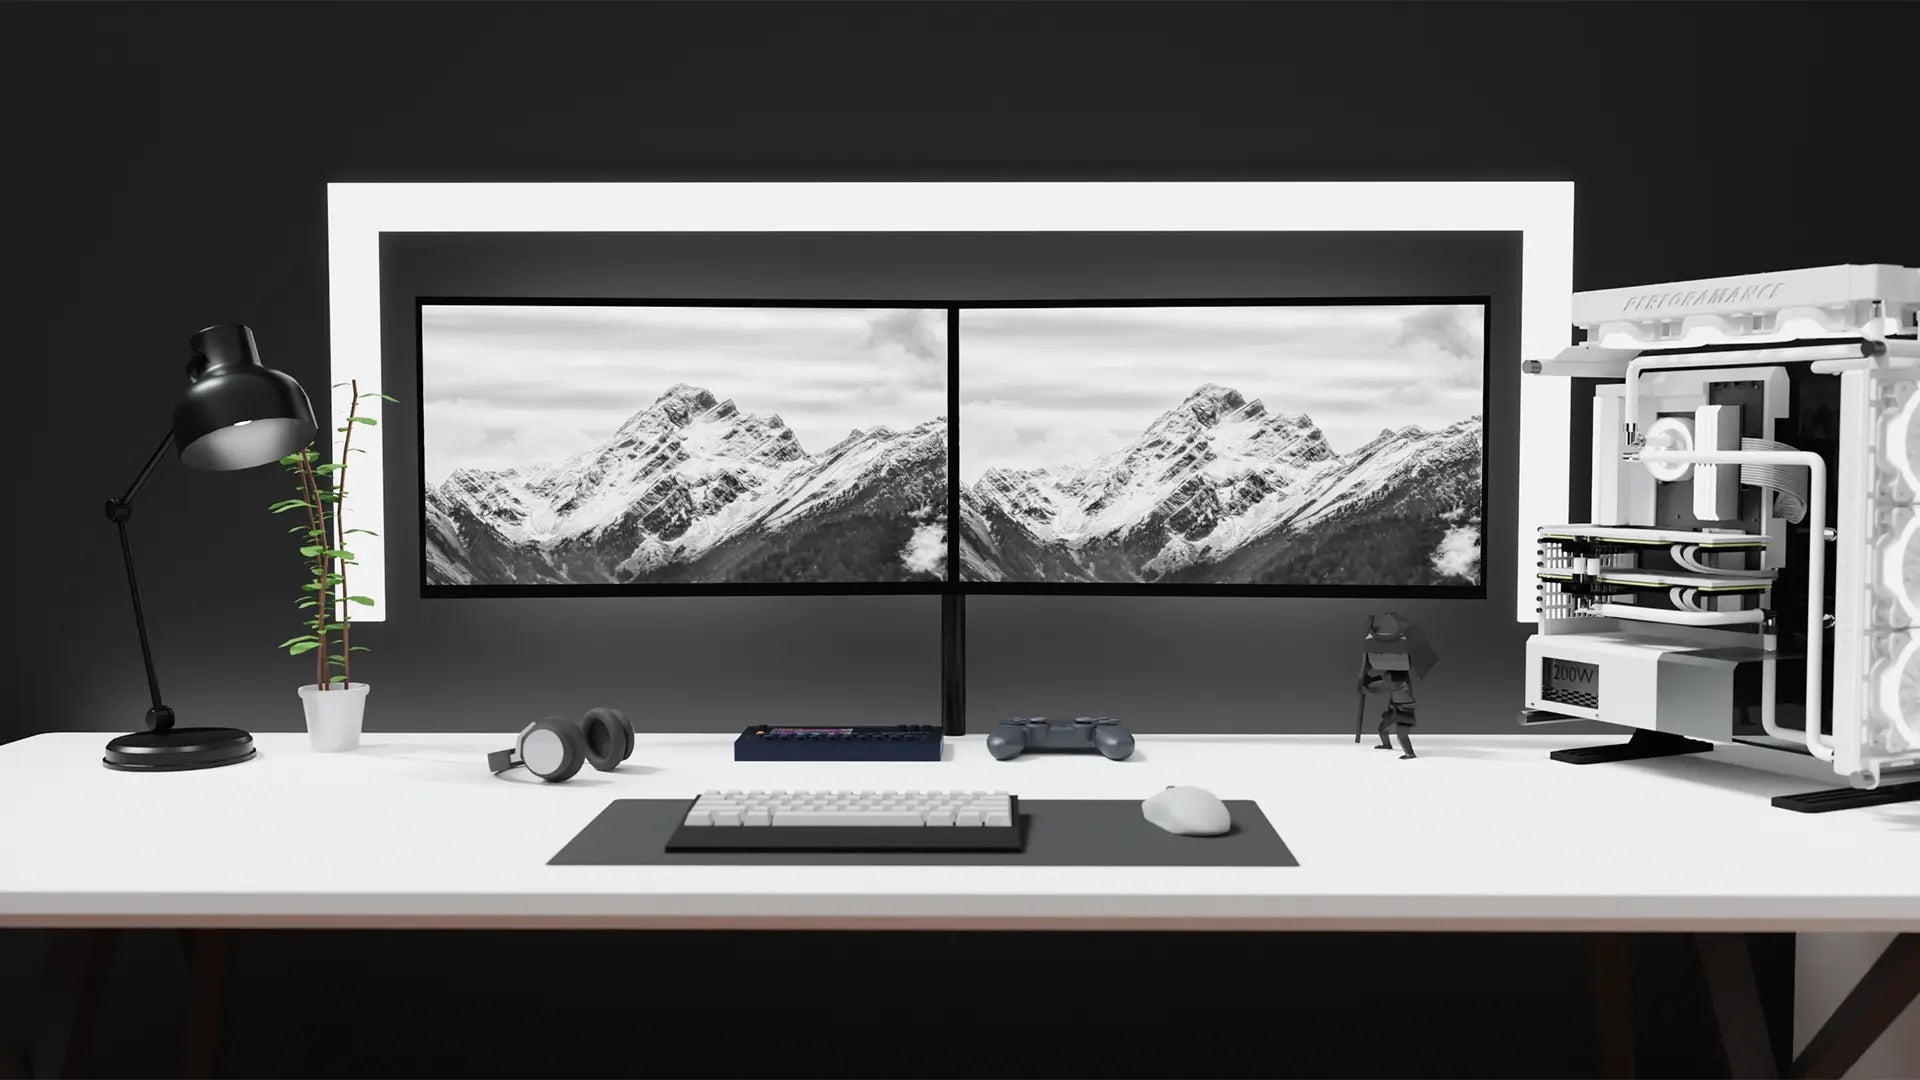 Black and White minimal Gaming Setup Render with Strumace gaming mousepad and accessories. 